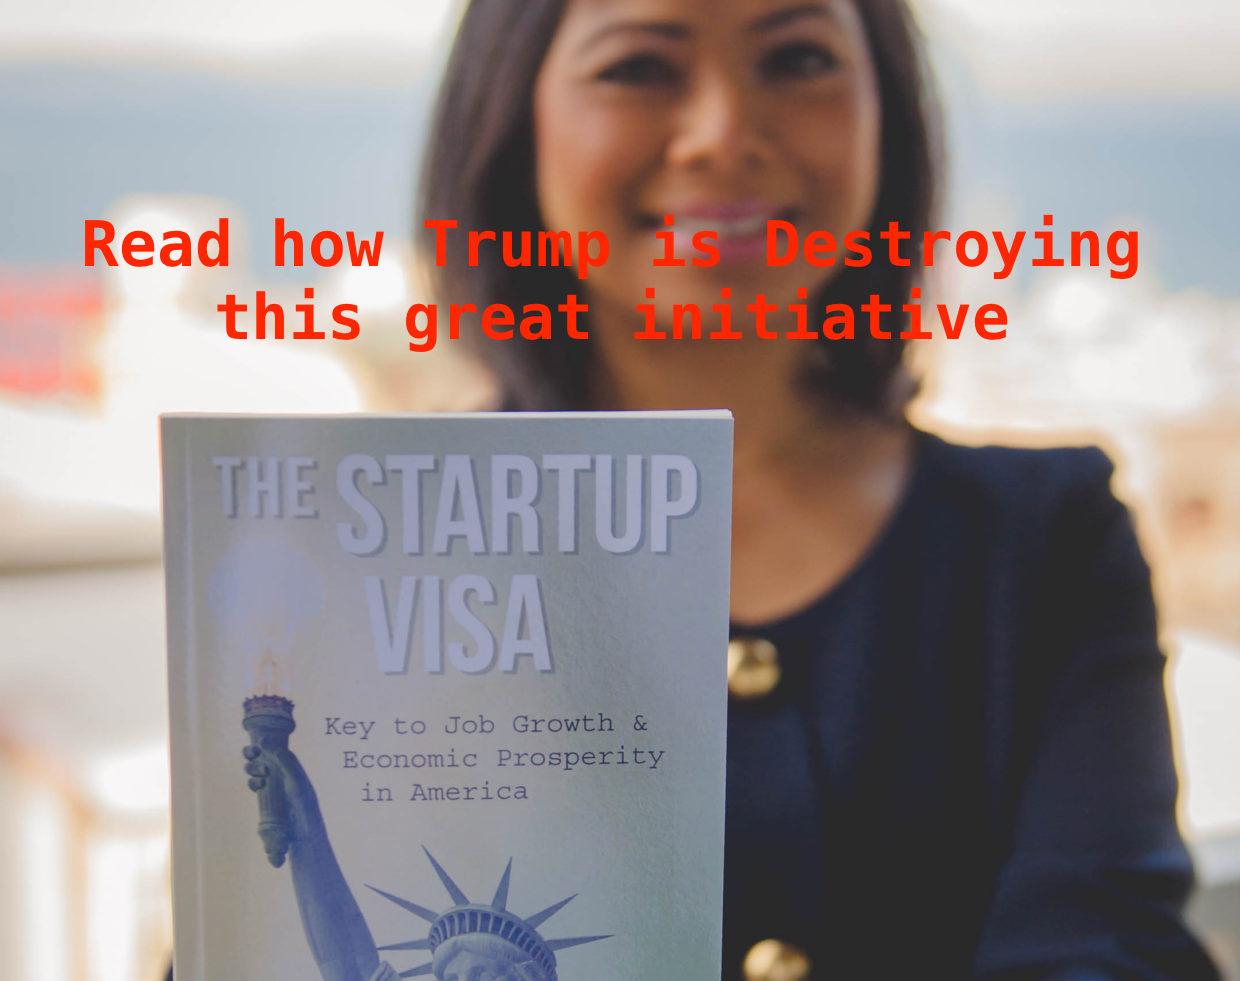 Trump to Pull down the Startup Visa Initiative by Obama